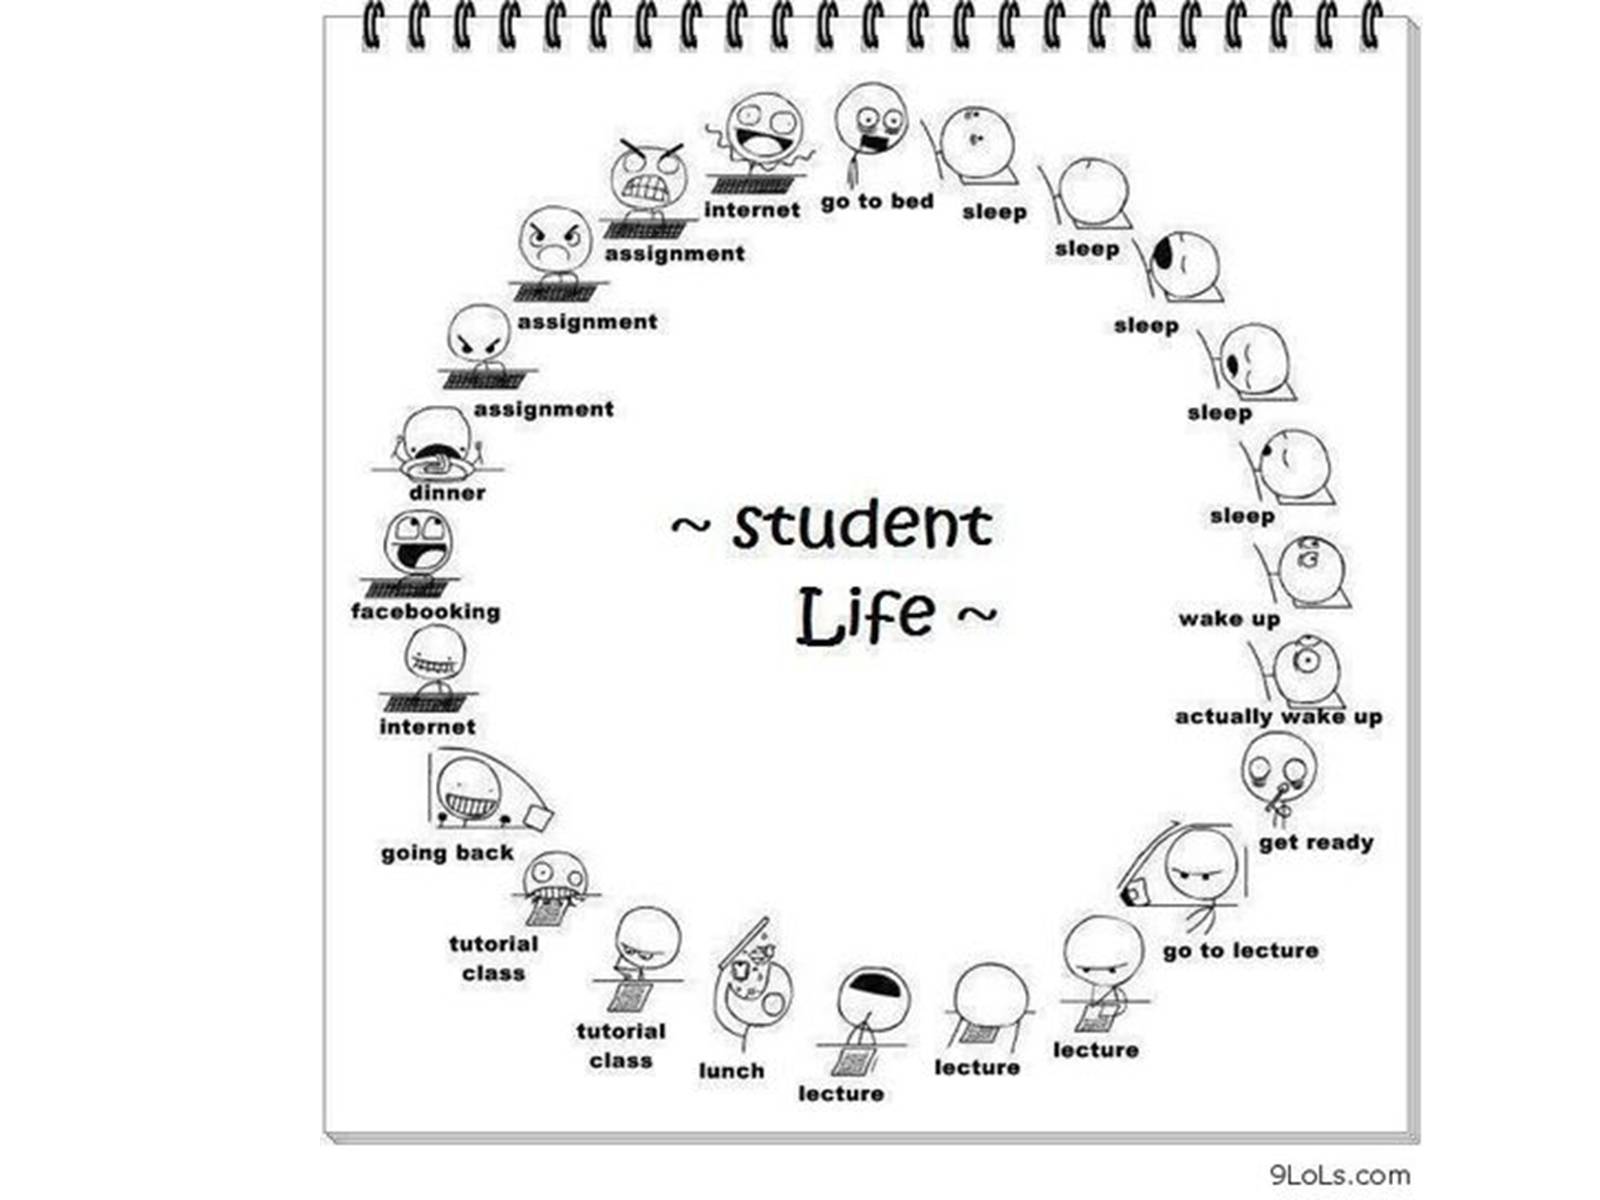 How students life. Student Life презентация. My student my Life презентация. Презентация на тему students Life. Students Life ppt.